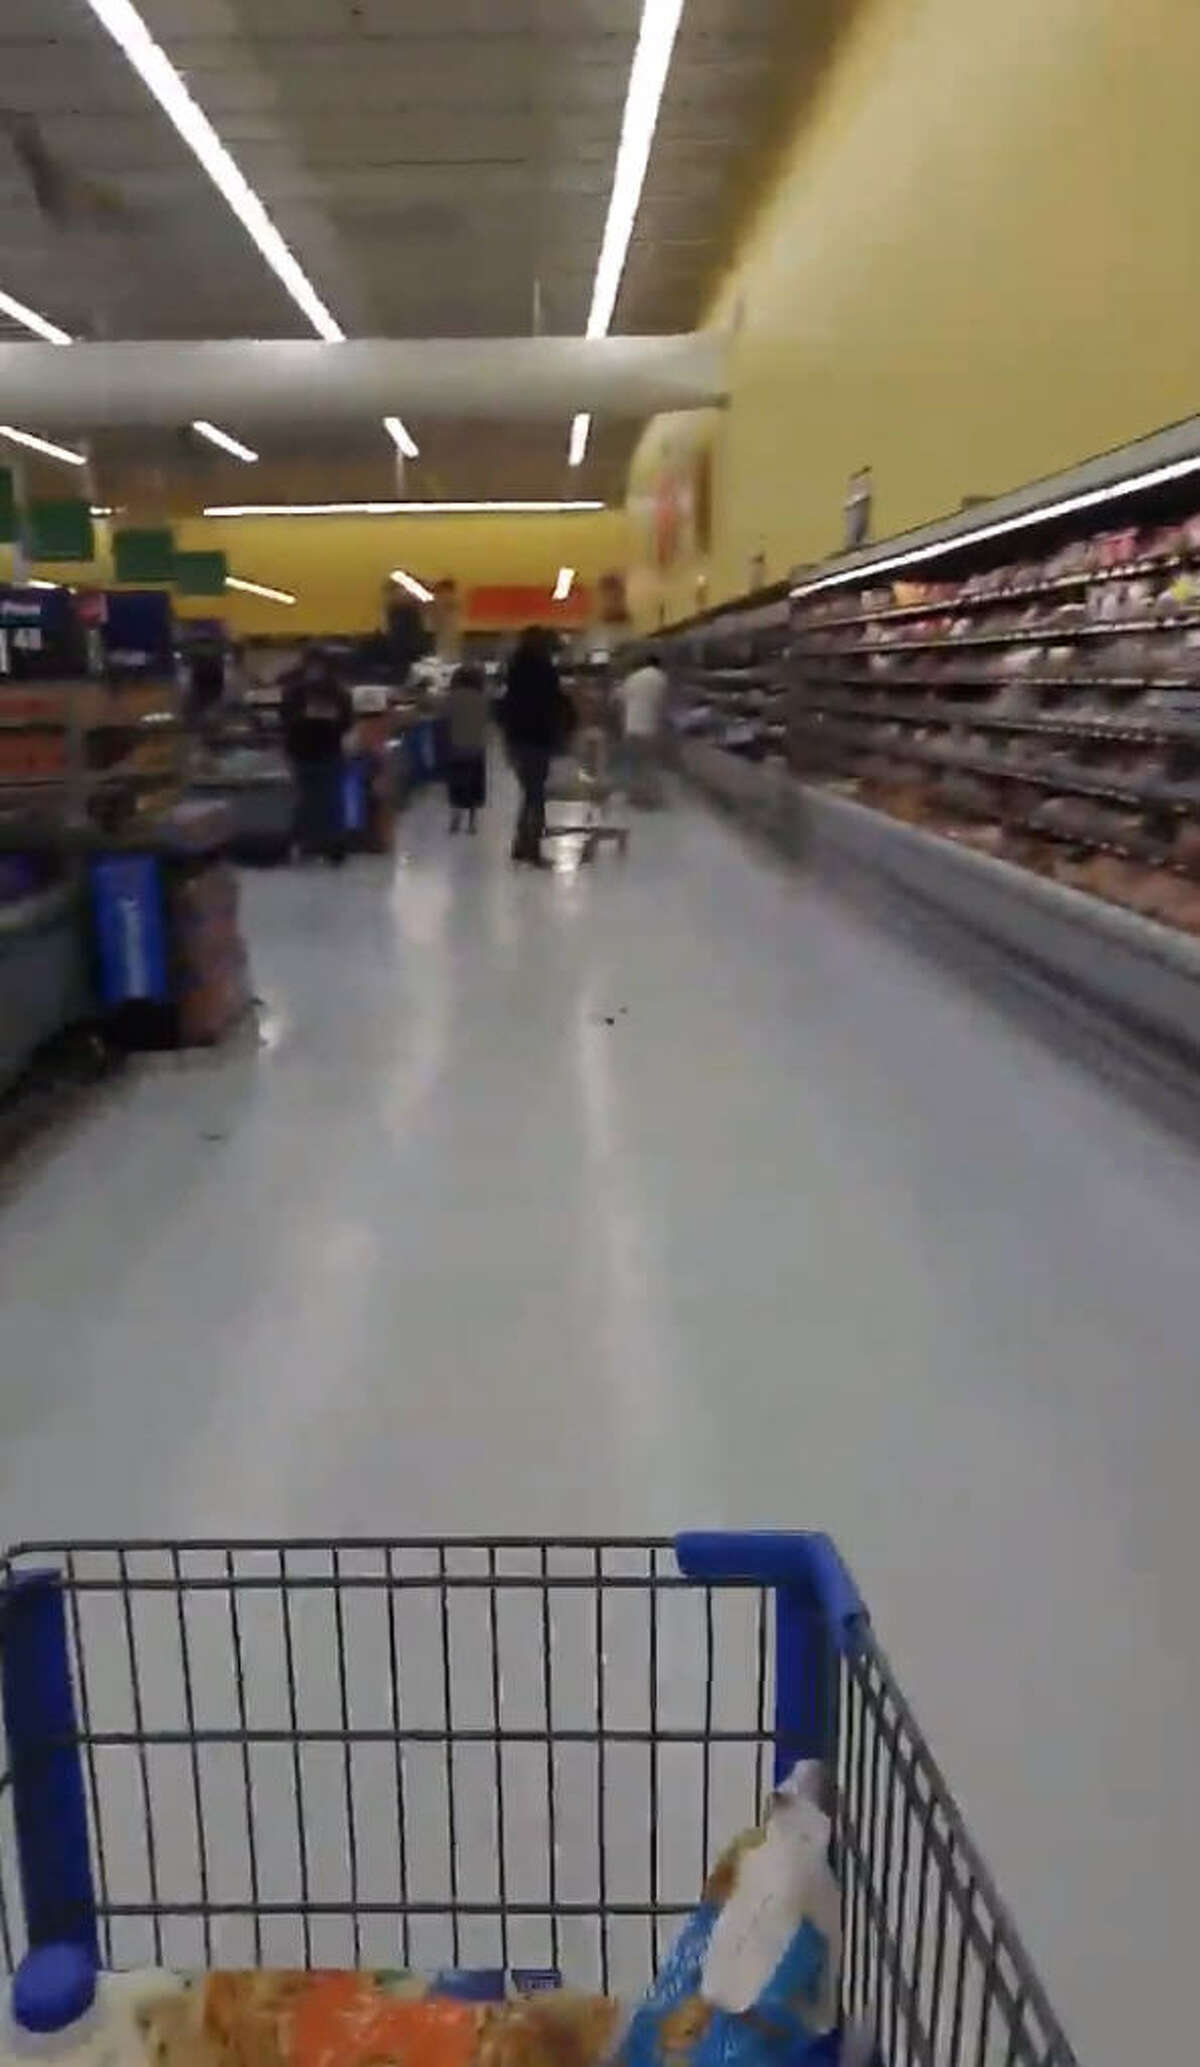 A Texas man was doing some dinner shopping at a Walmart in Alvin when he found himself surrounded by bats.